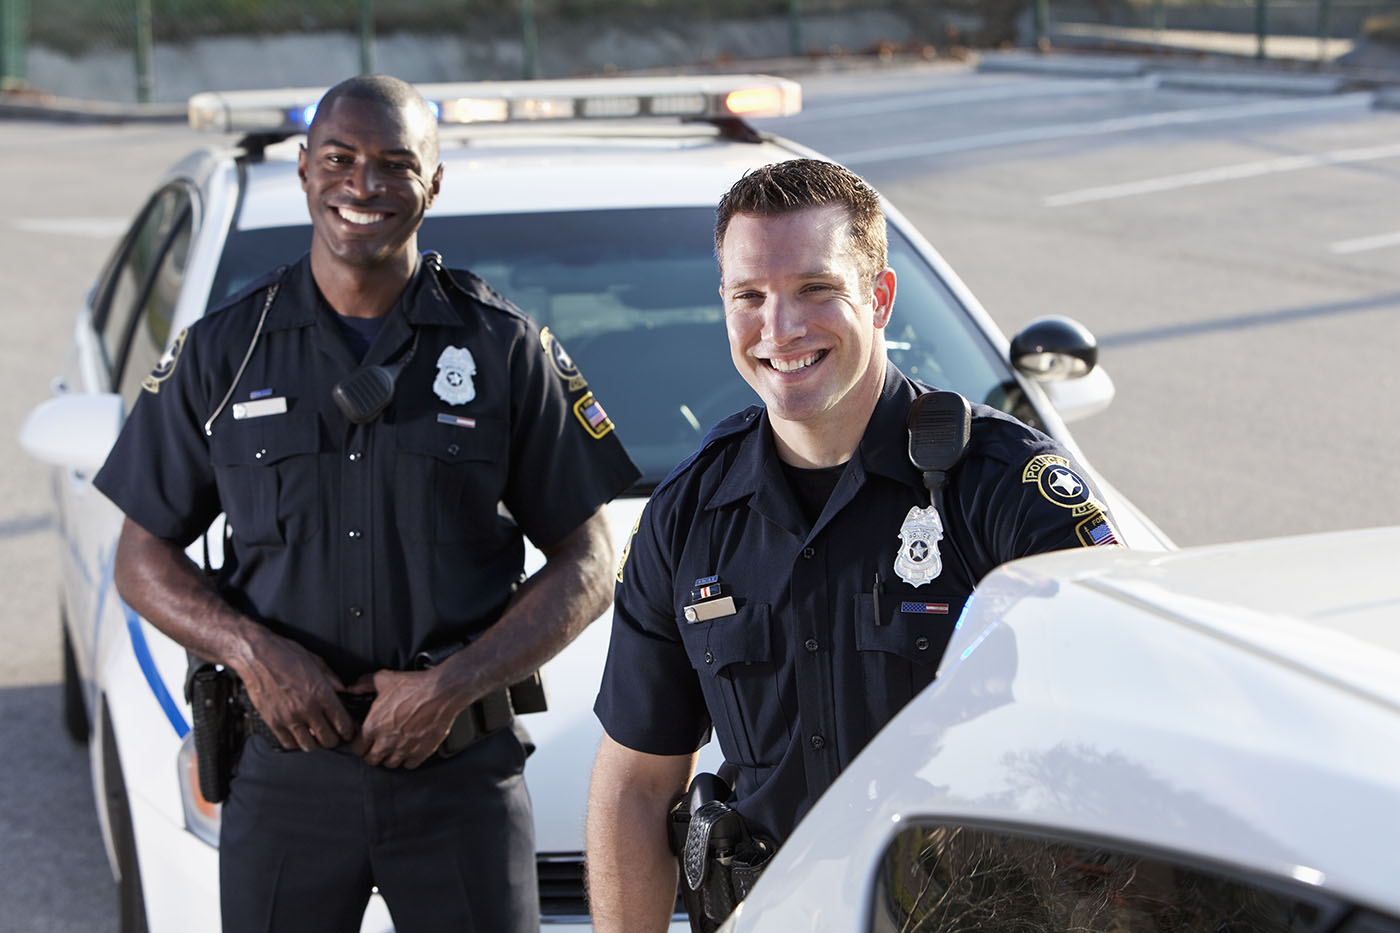 Become A Police Officer In The USA